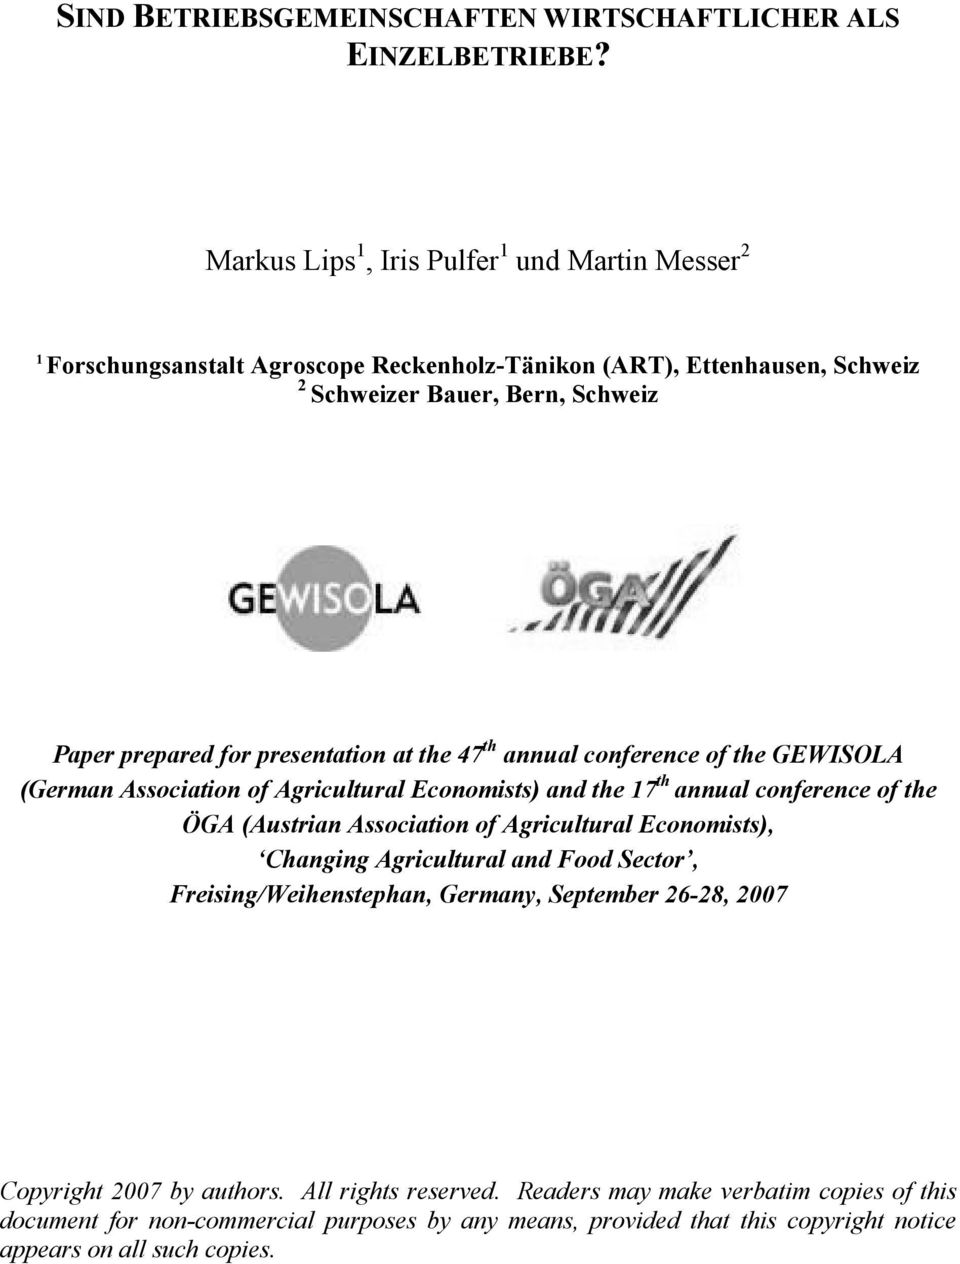 presentation at the 47 th annual conference of the GEWISOLA (German Association of Agricultural Economists) and the 17 th annual conference of the ÖGA (Austrian Association of